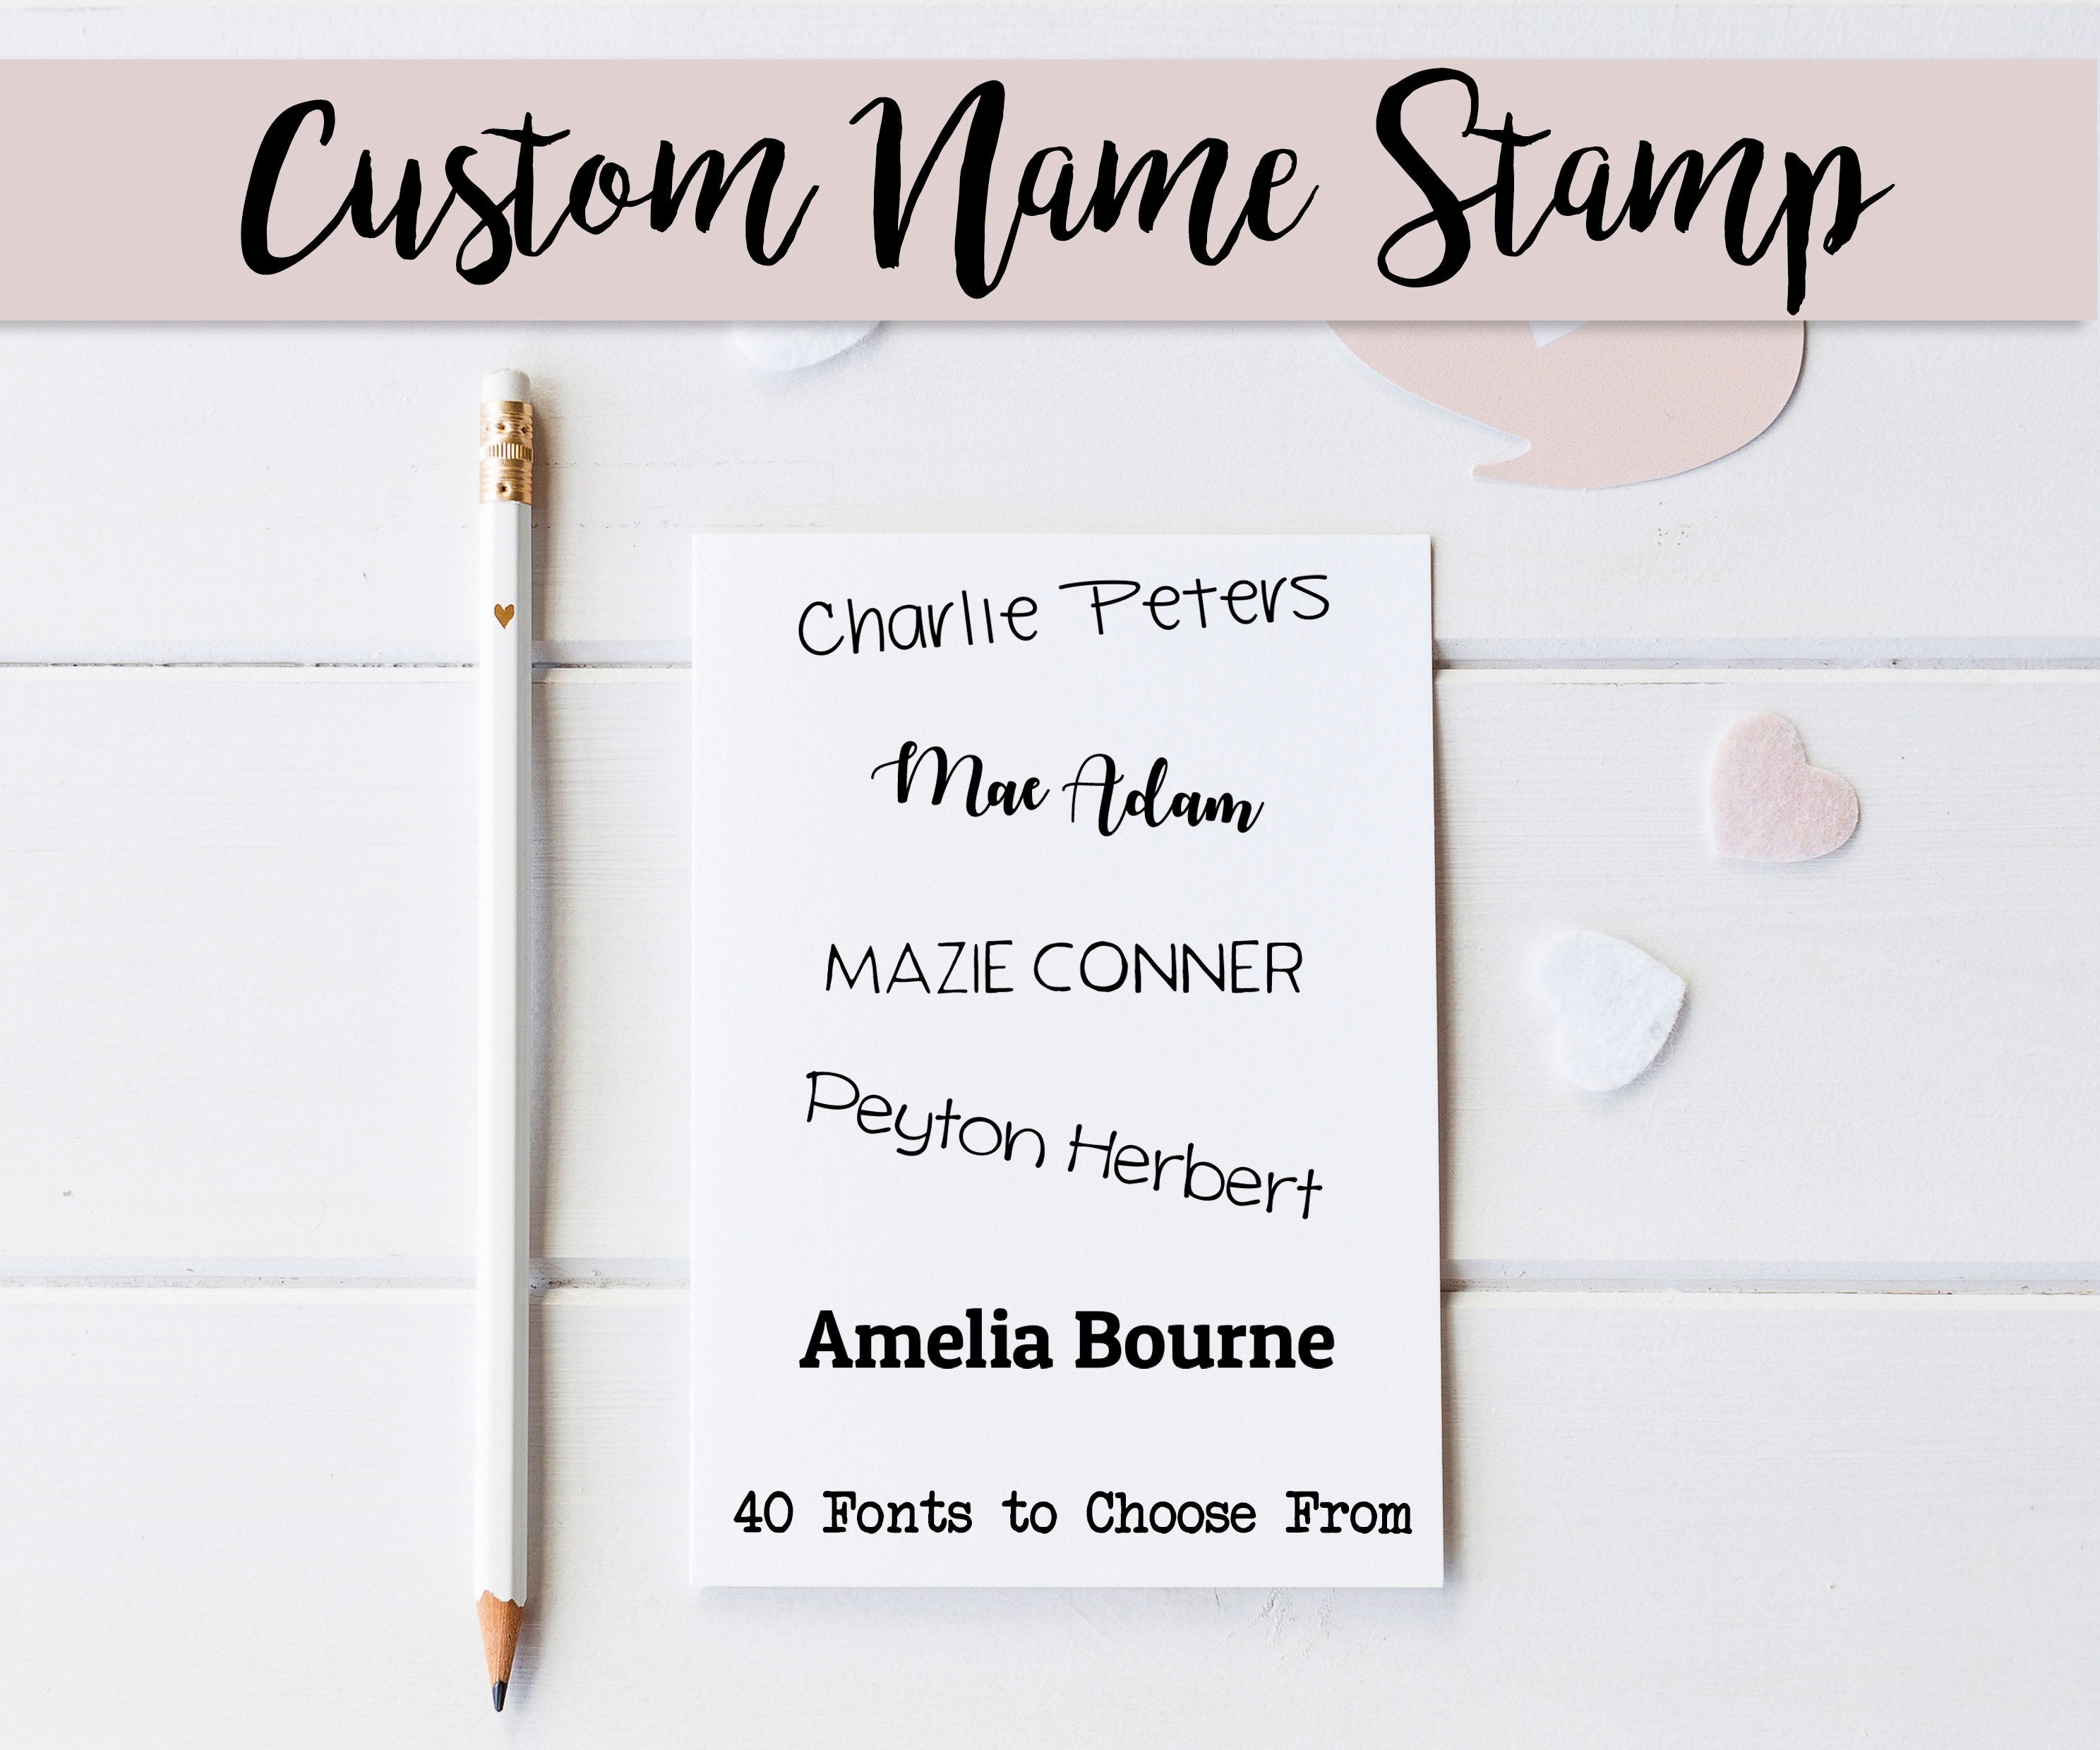 Custom Name Stamps up to 2.5x1, Signature Stamp. Personalized